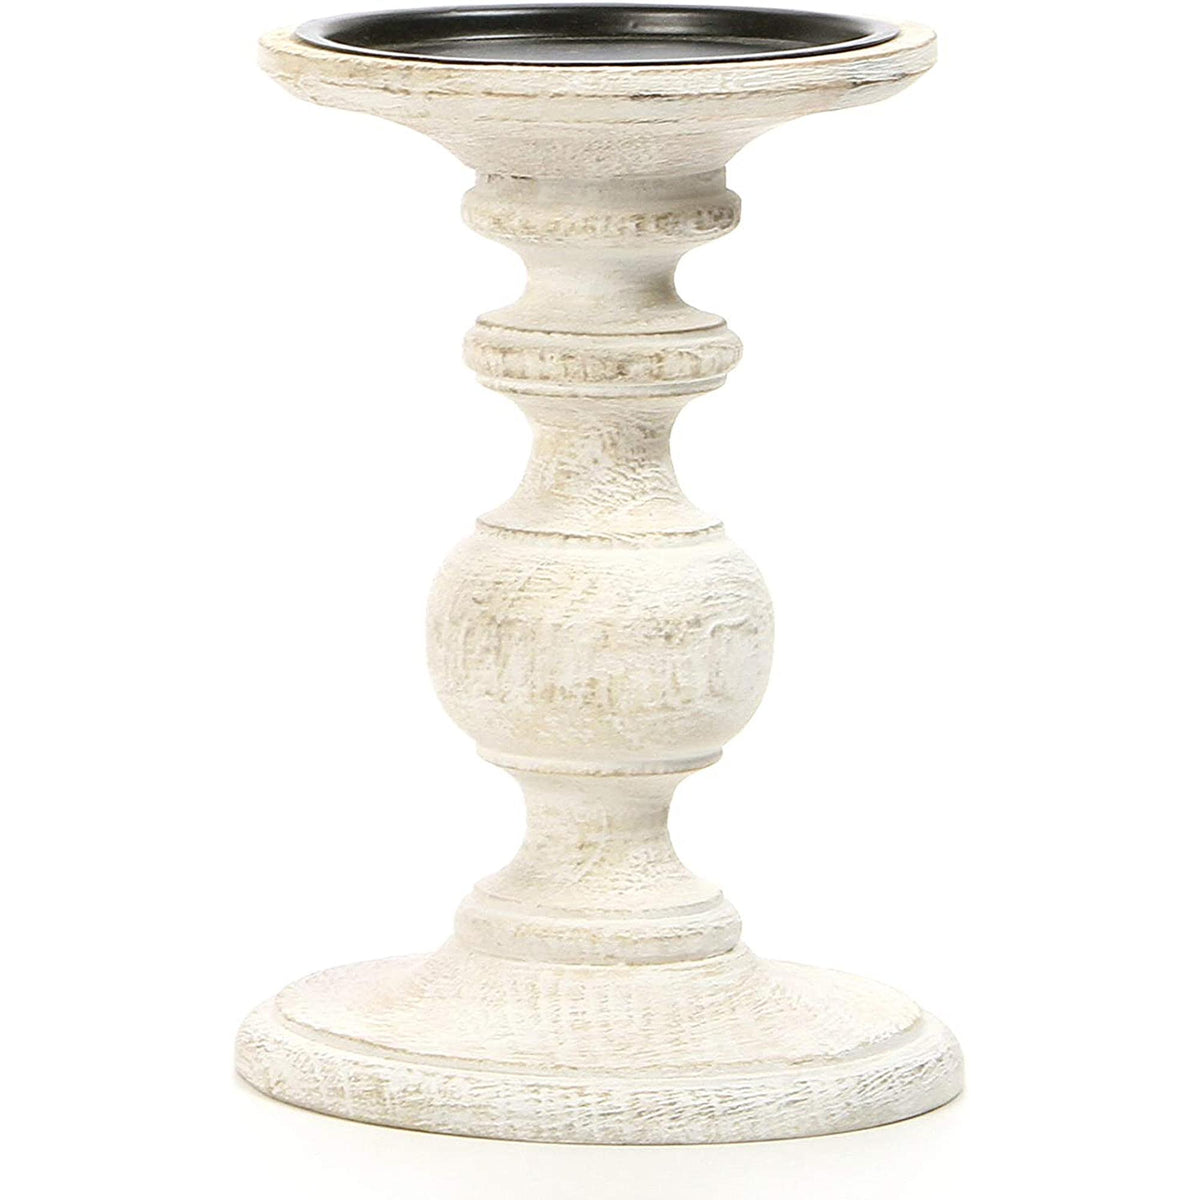 HOSLEY®  Wood Pillar Candle Holder, White Color, 7 inches High